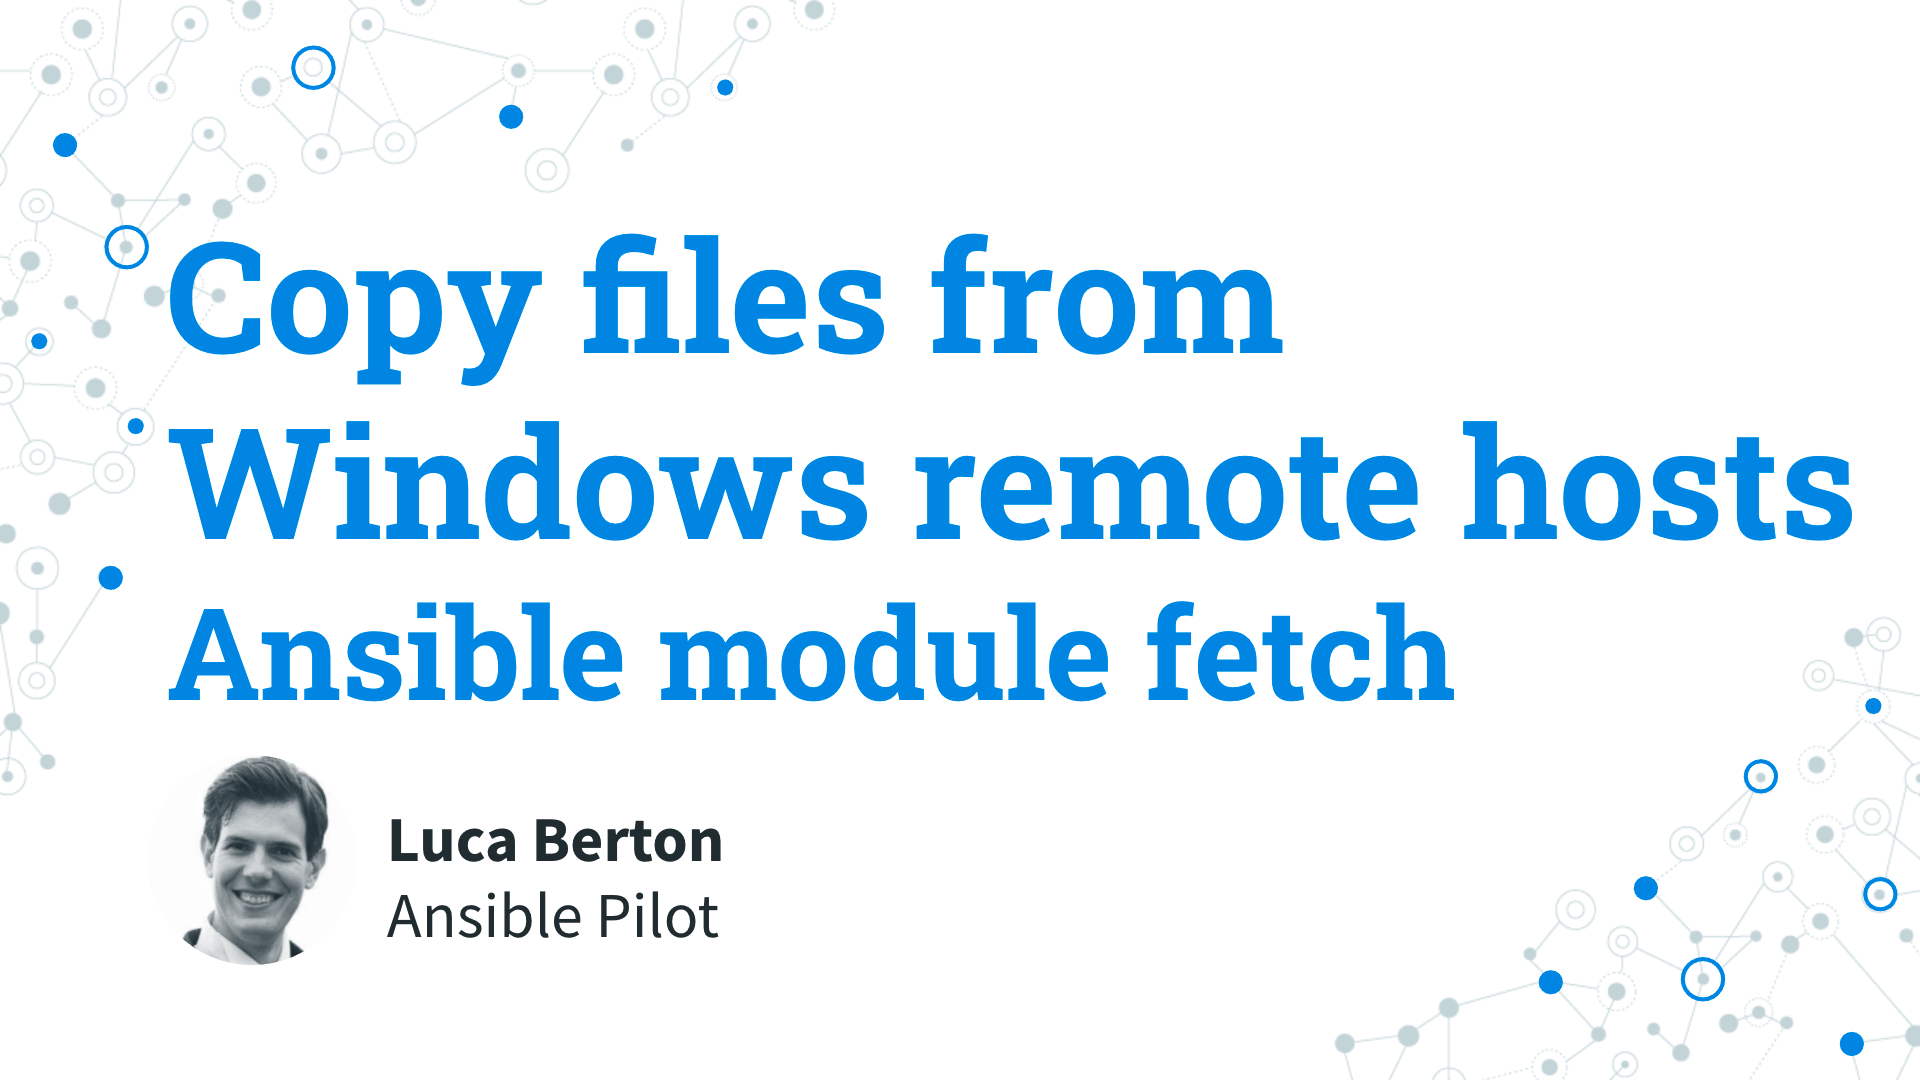 Copy files from Windows remote hosts - Ansible module fetch